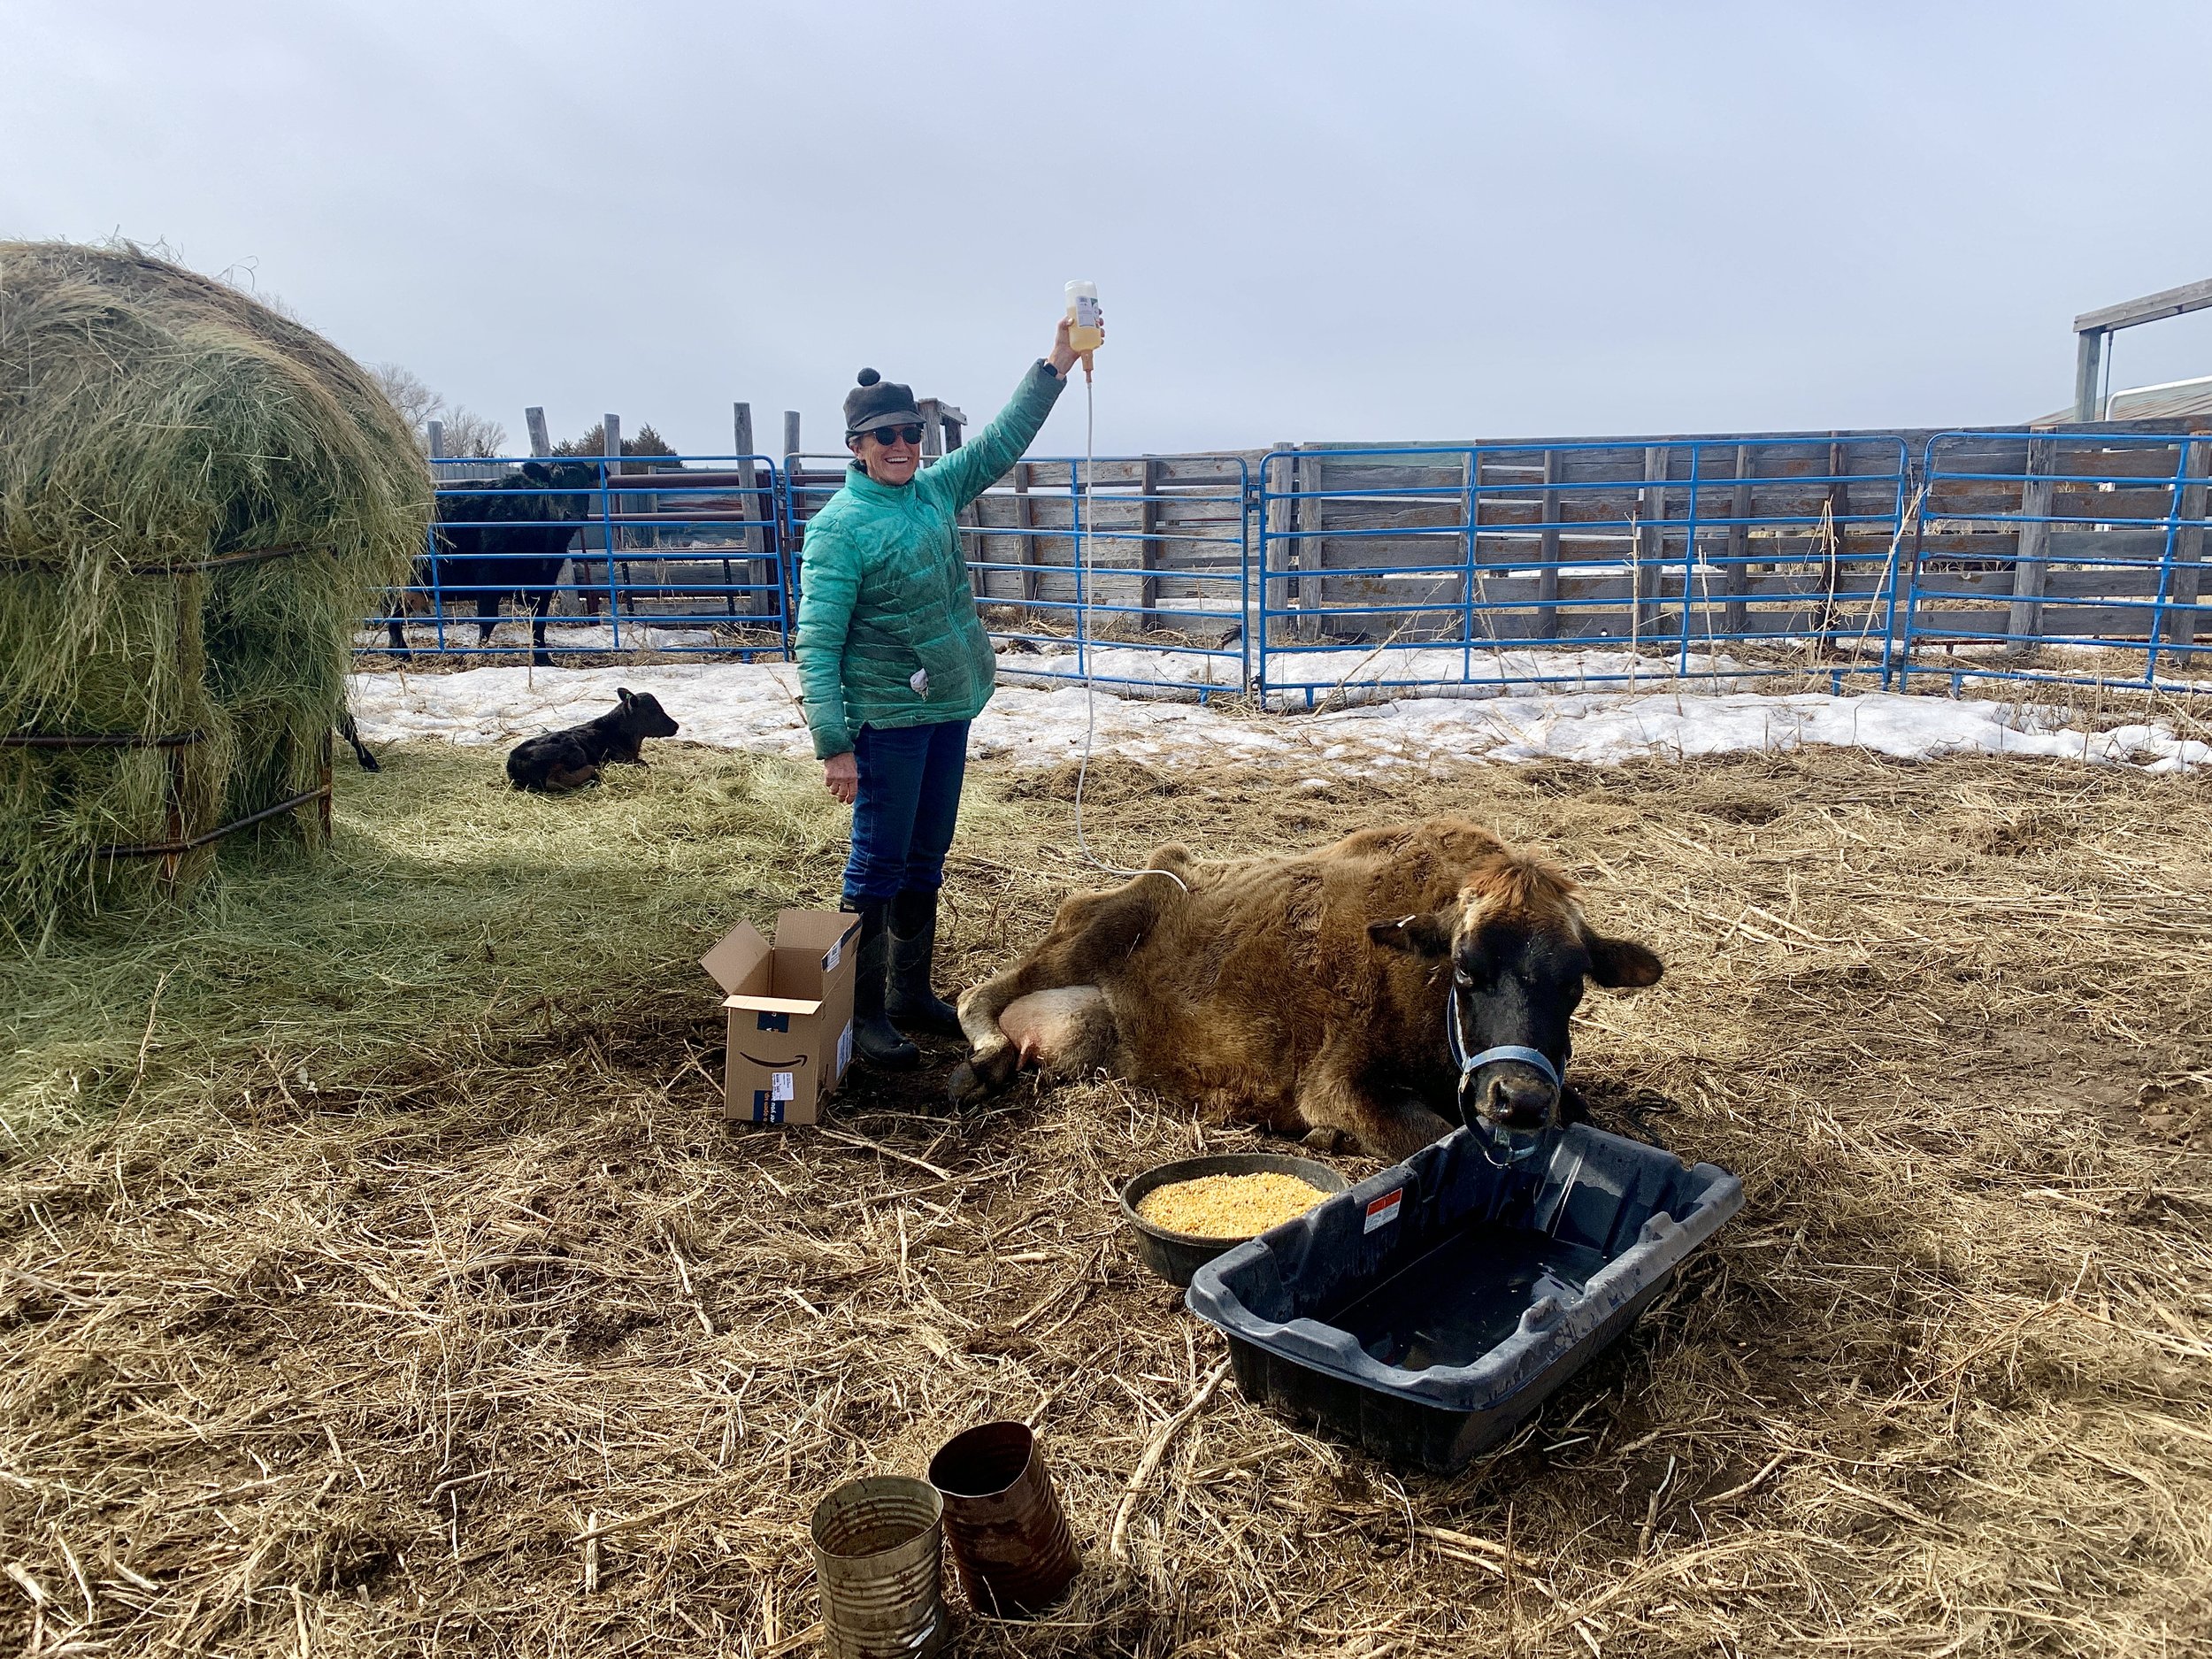  My milk cow, Heidi, didn’t fare through the winter well (did any of us?) After birthing a cute little heifer calf she became lethargic with milk fever and despite the efforts of my wonderful mother-in-law Carol for administering IV’s and other meds,